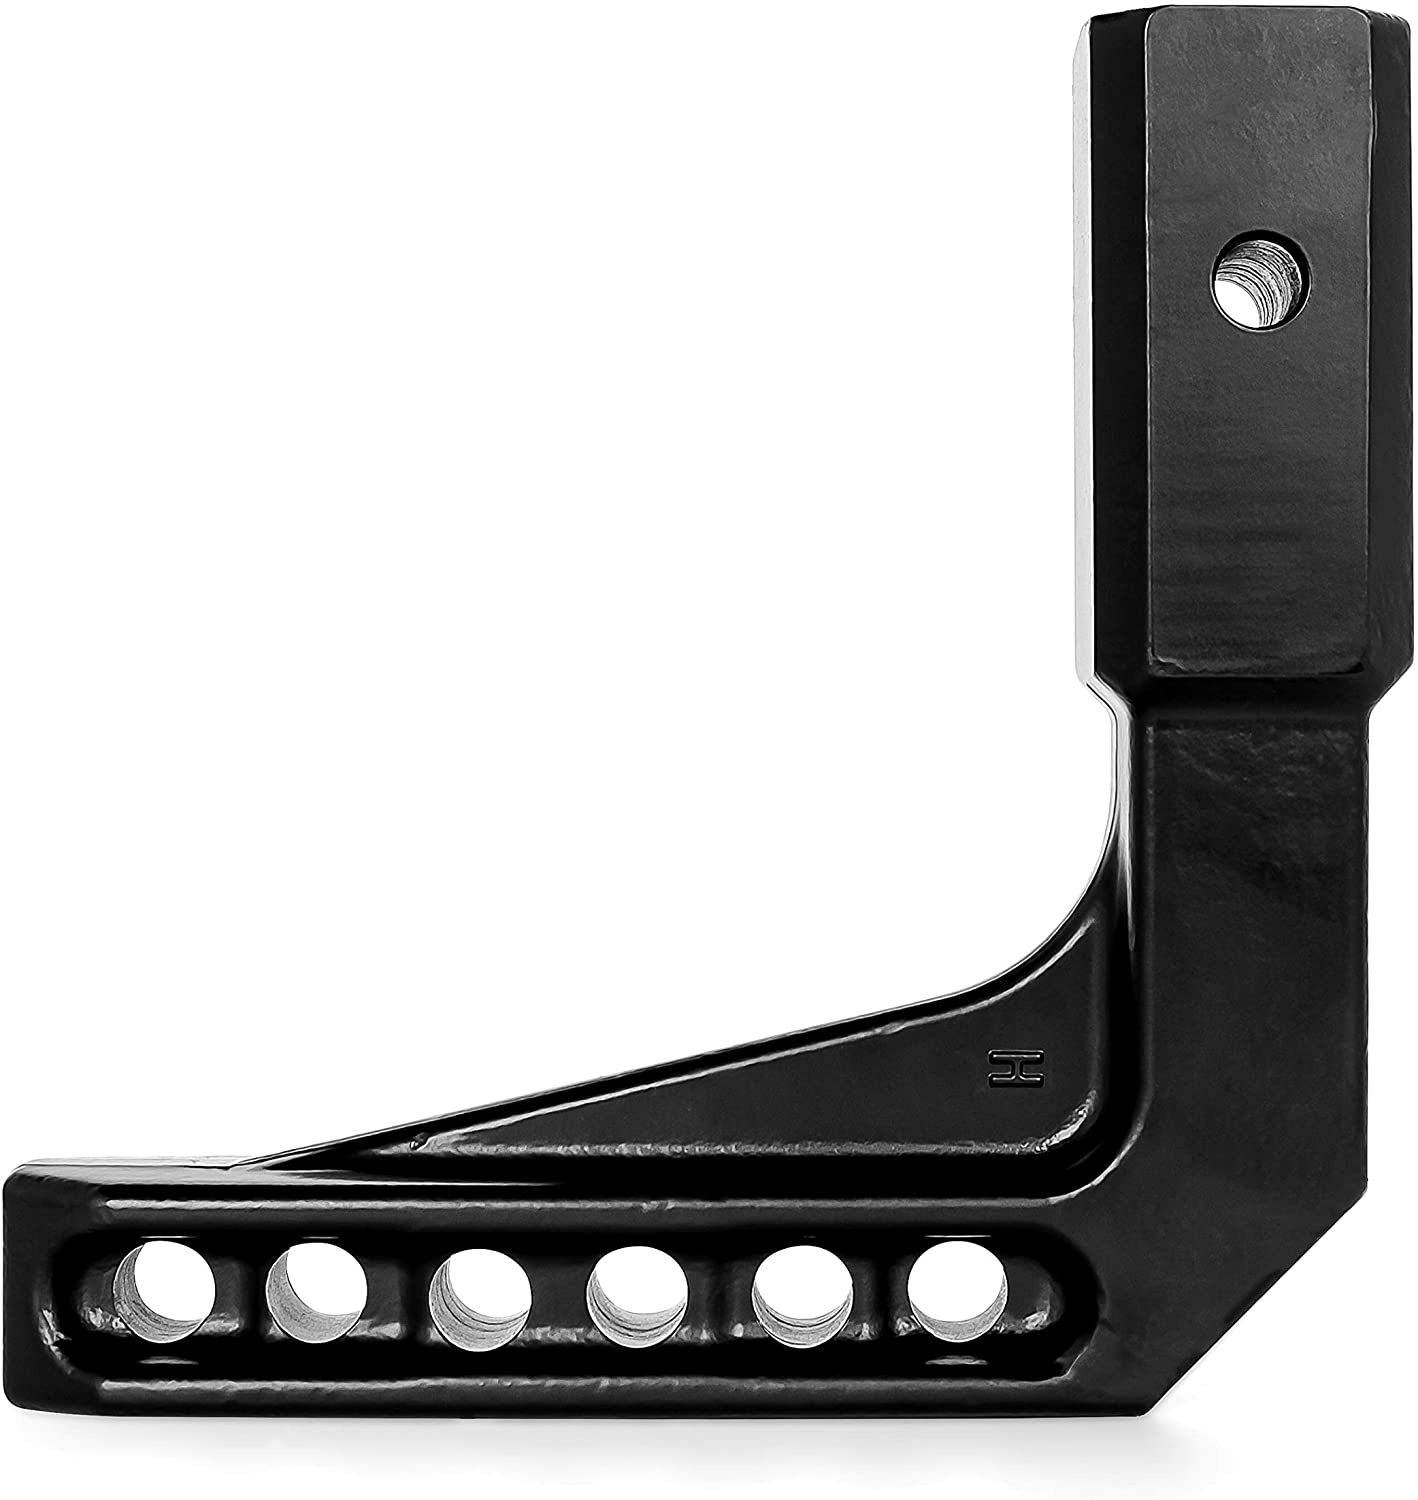 Rating EAZ LIFT Camco 2.5-inch Shank 48652 Modify The Vertical Height of Your Ball Mount 15,000 lb Standard Ball Mount Adaptable